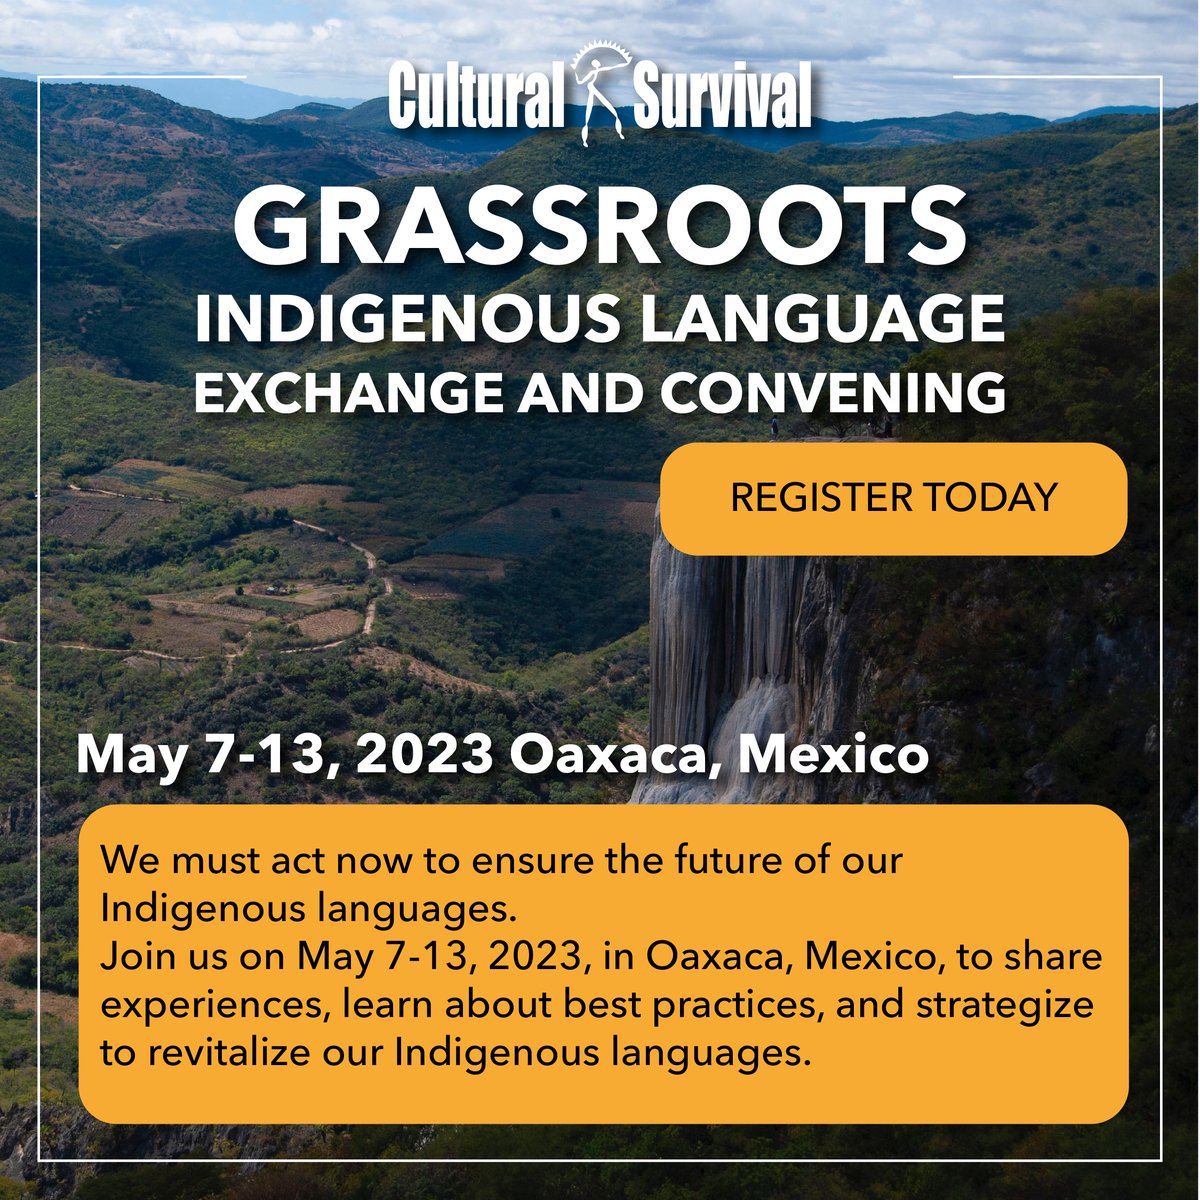 Starting tomorrow! Join us from May 7-13, 2023, in Oaxaca, Mexico to learn about best practices, share experiences, and strategize for #LanguageRevitalization among #IndigenousPeoples.